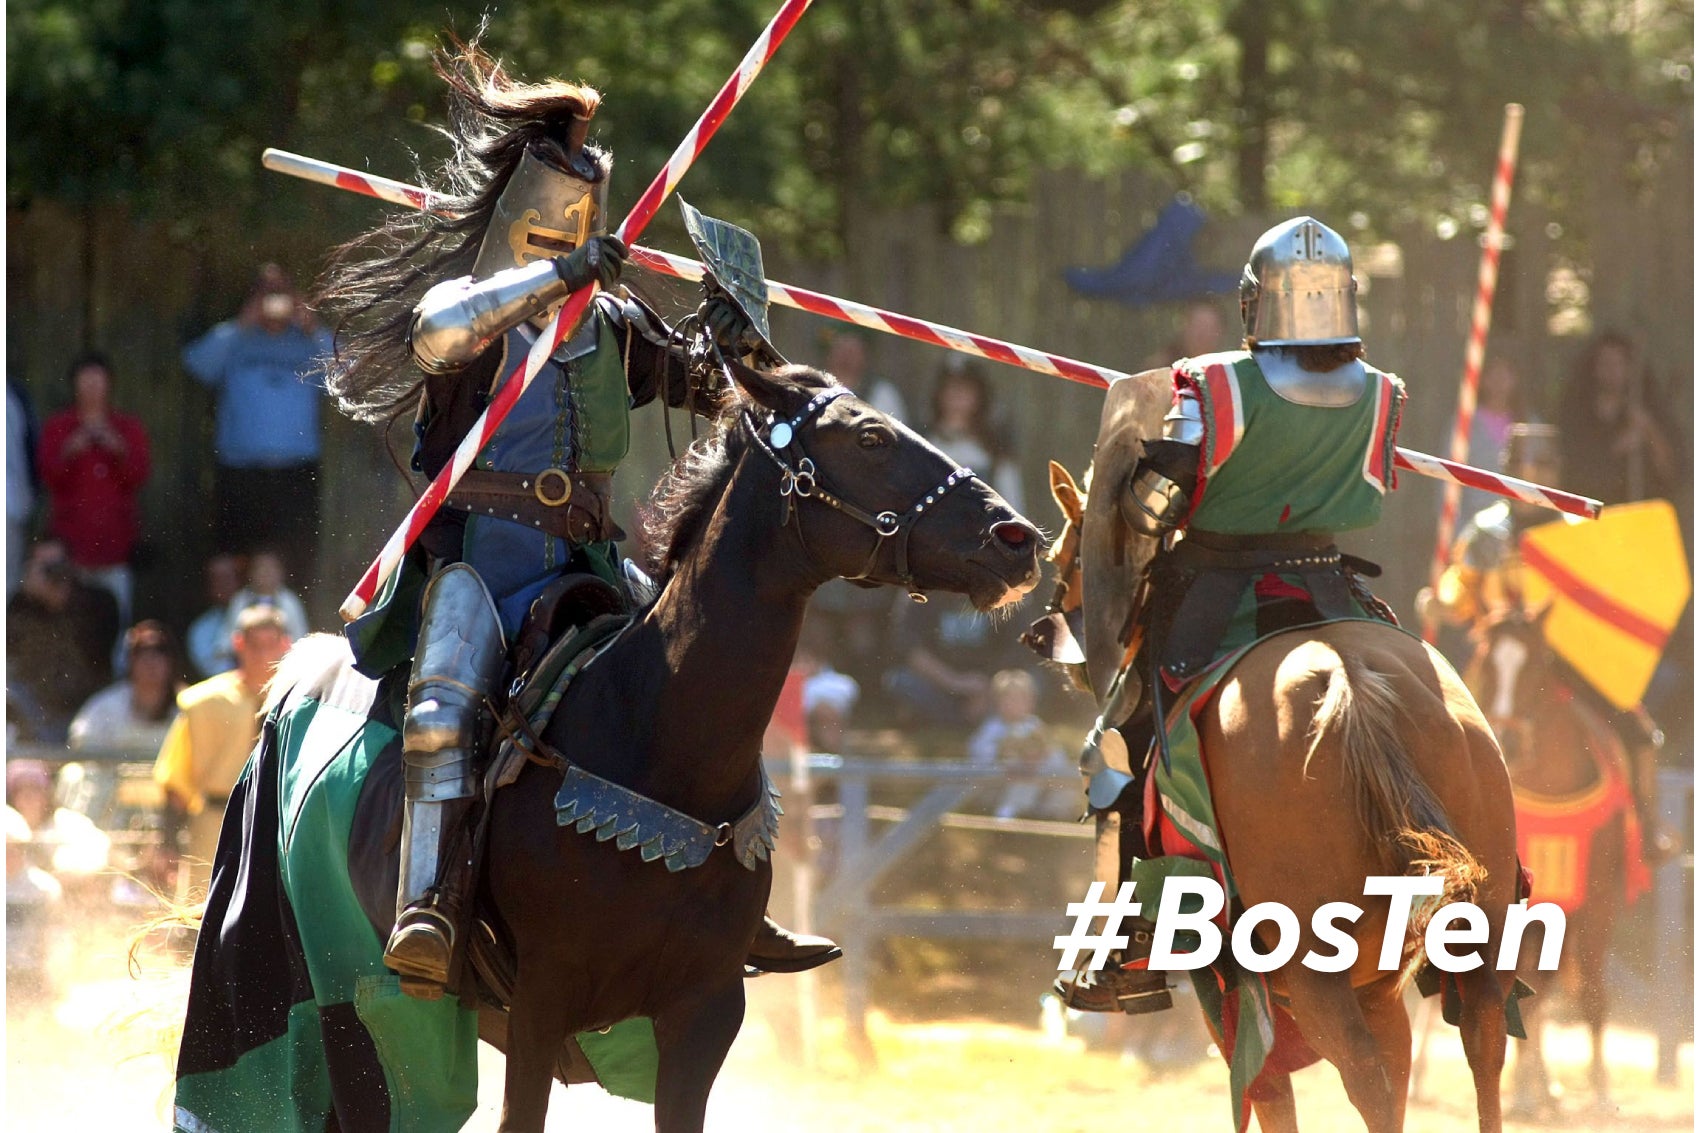 A joust at the annual King Richard's Faire.